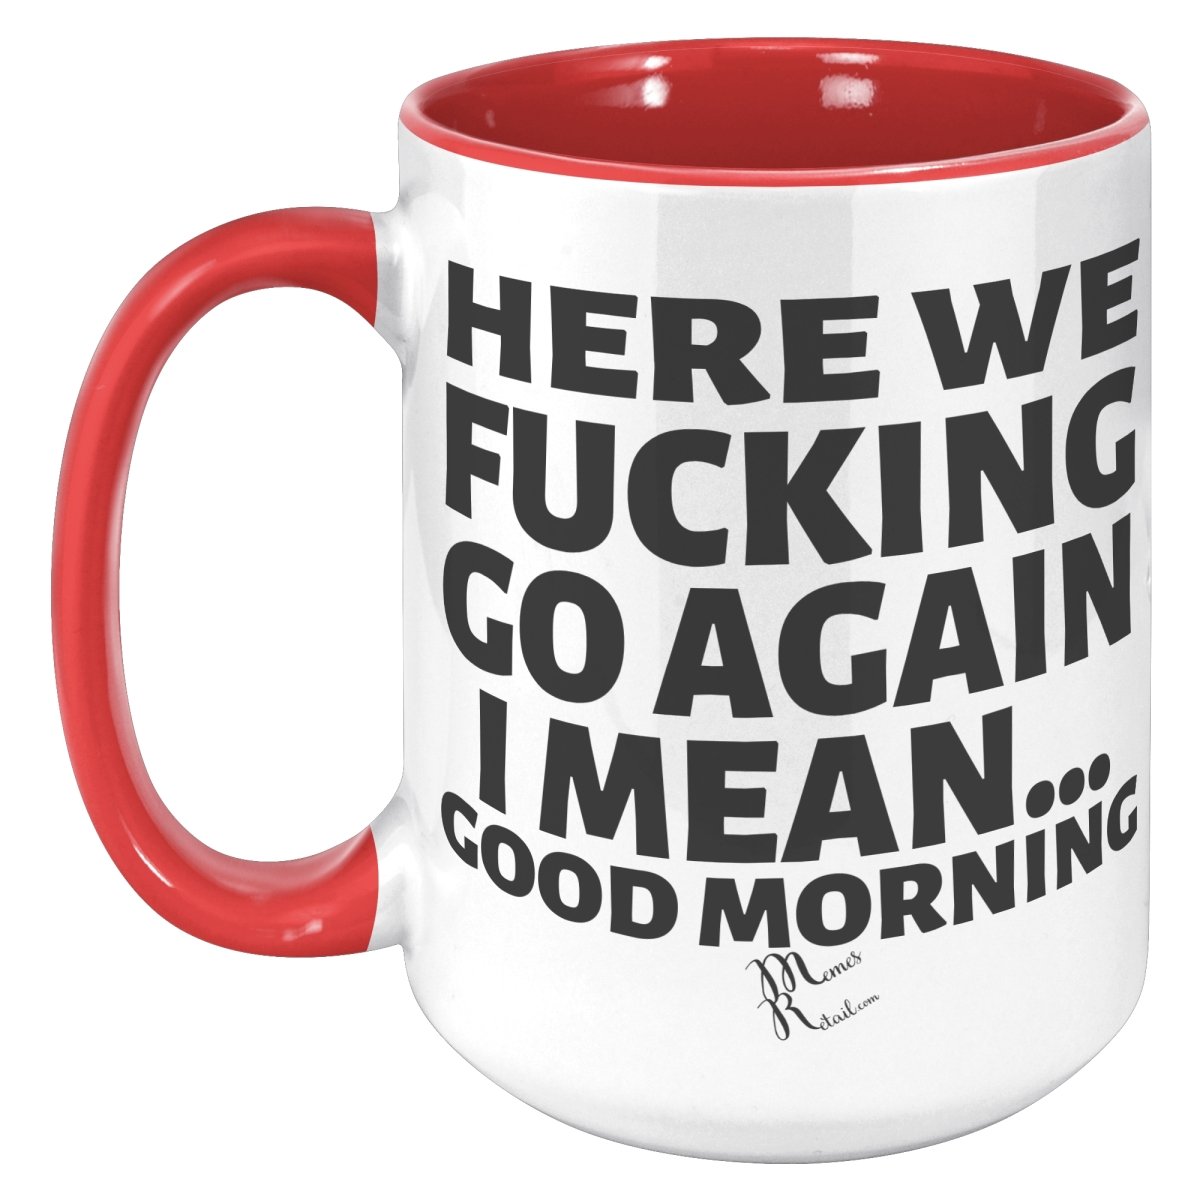 Here We Fucking Go Again, I mean...good morning - Big Lettering Mugs, 15oz / Red Accent - MemesRetail.com